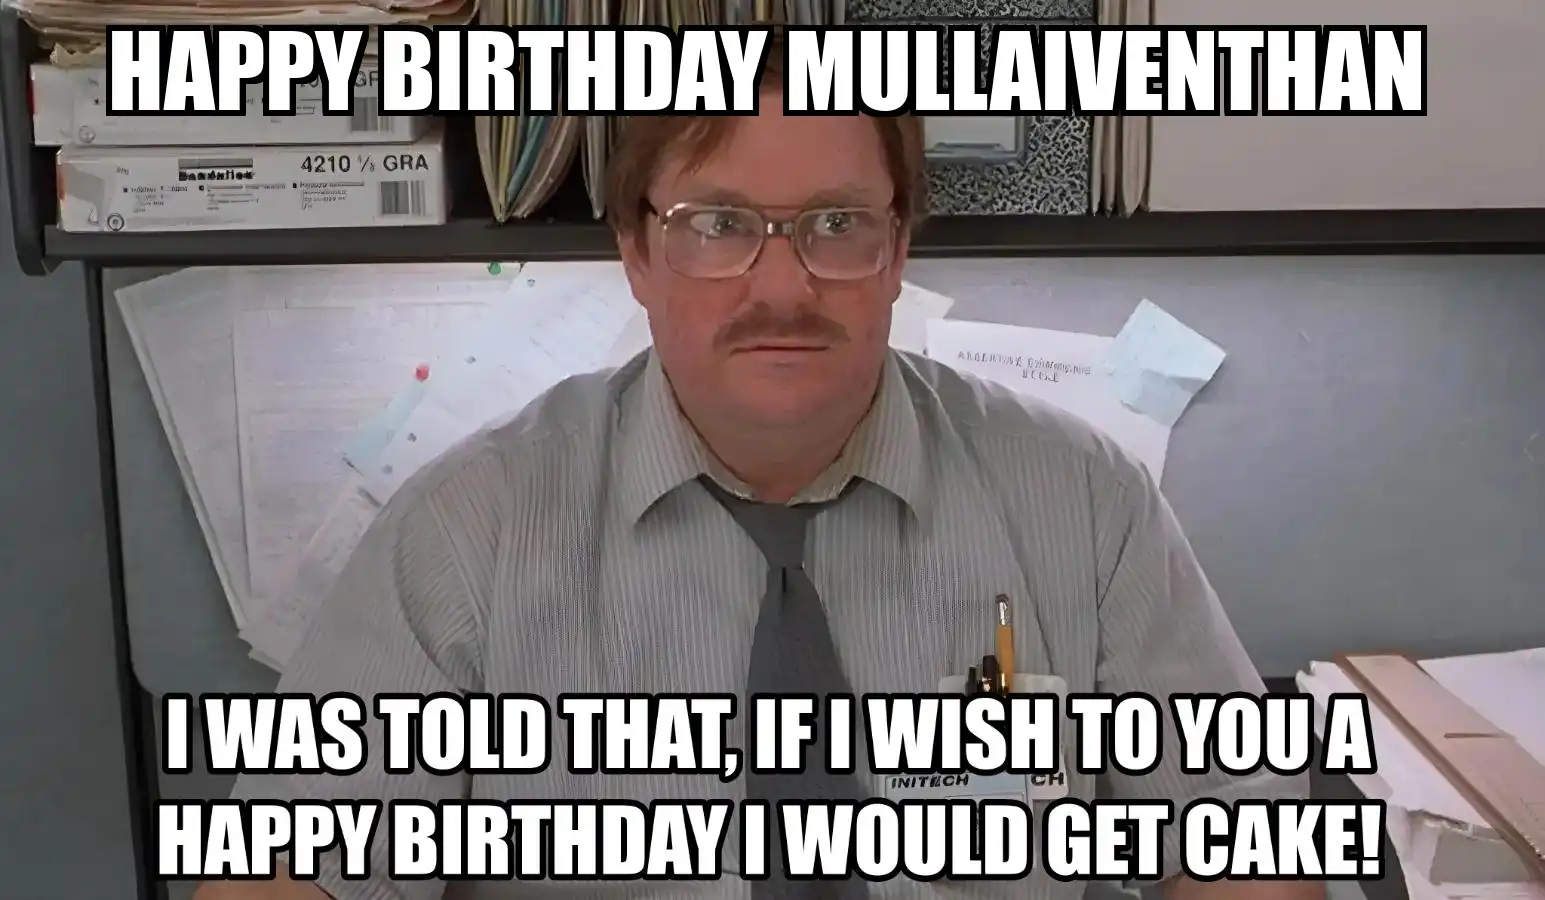 Happy Birthday Mullaiventhan I Would Get A Cake Meme